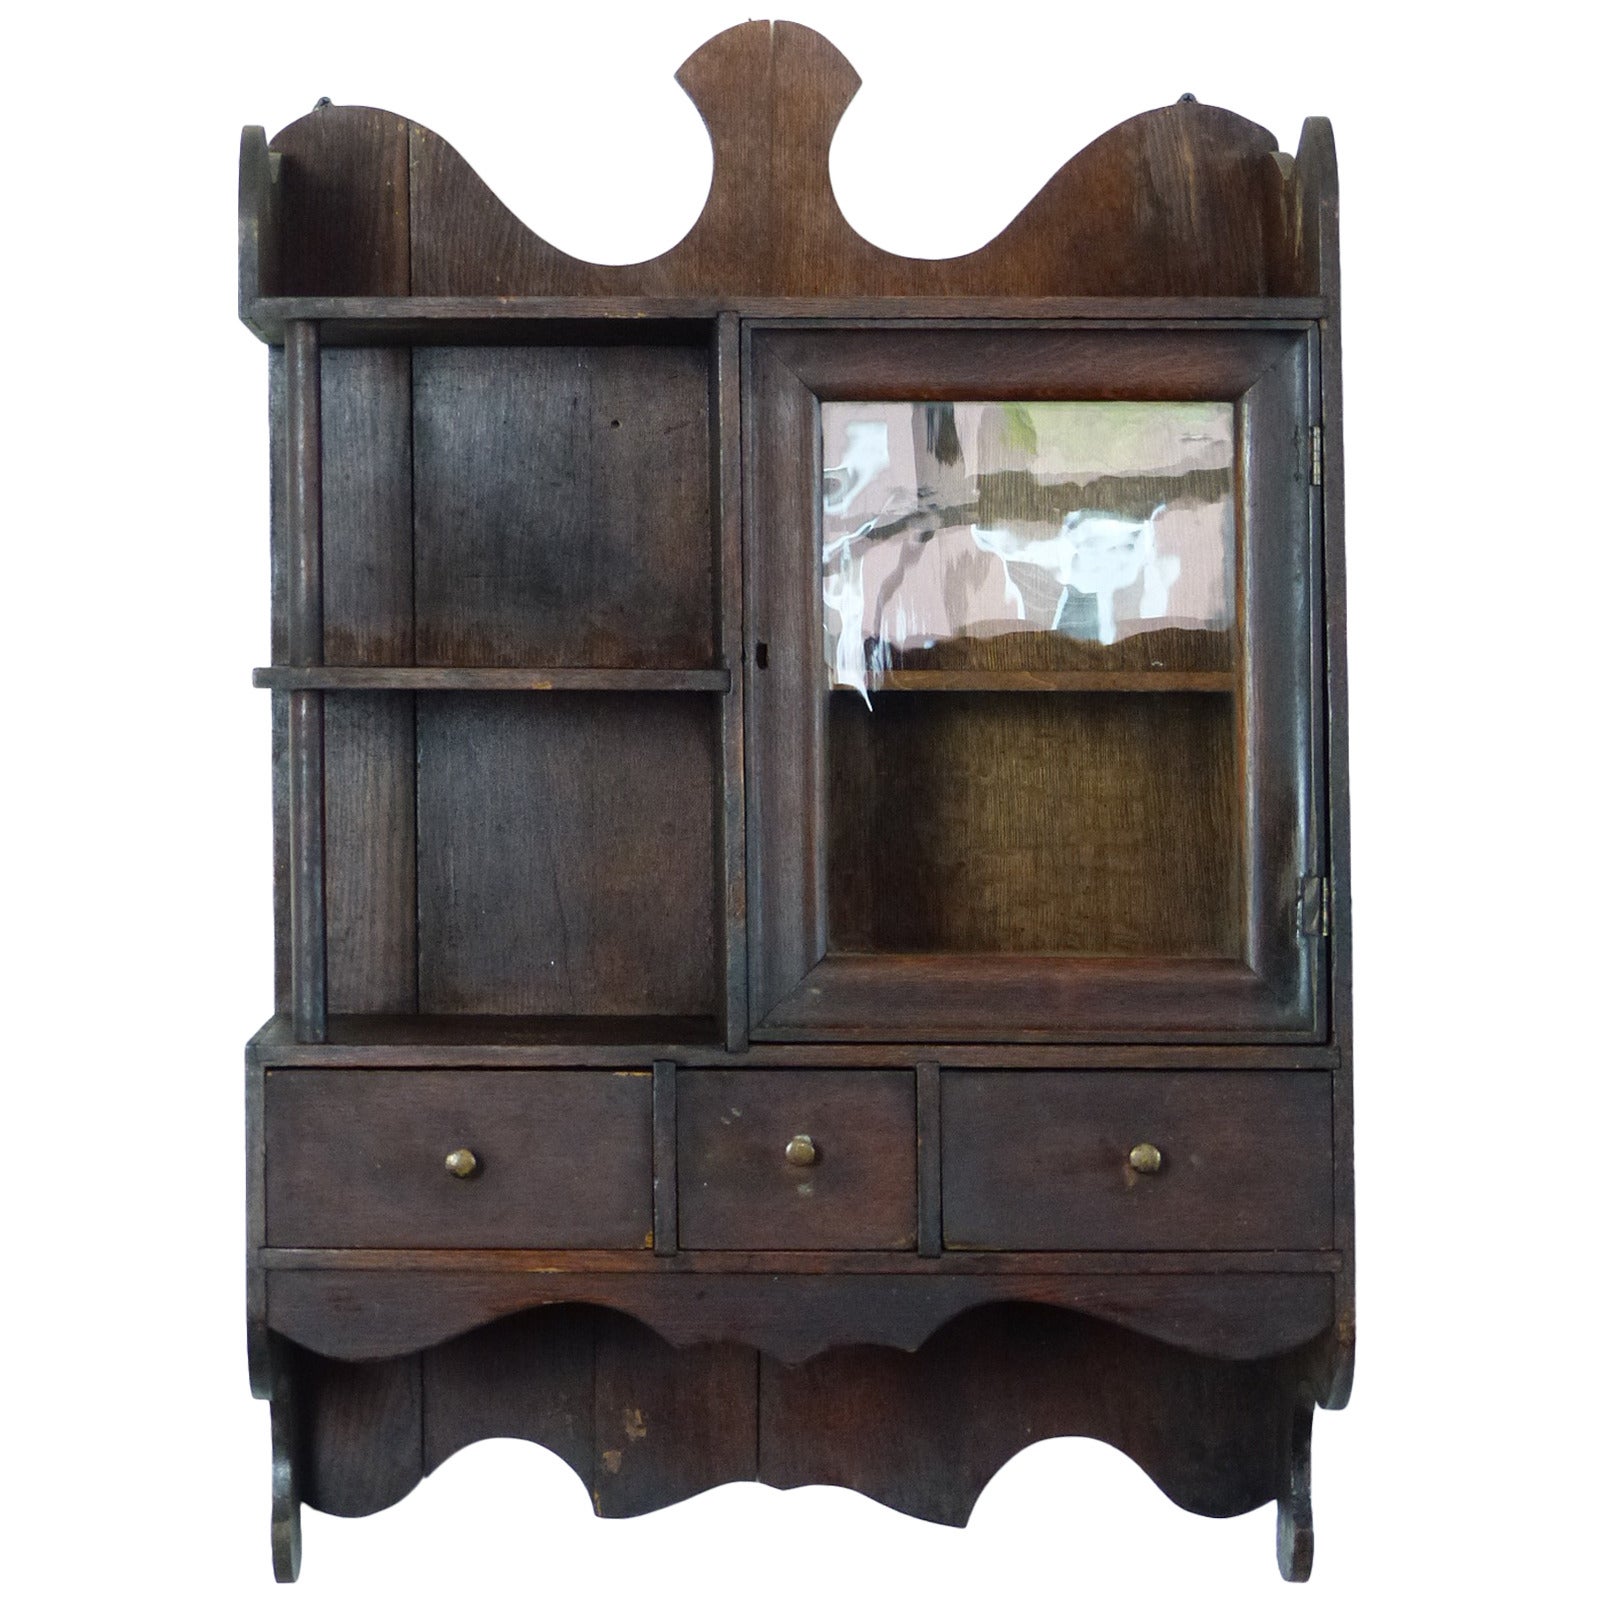 1920 Small Wall Hanging Apothecary Cabinet